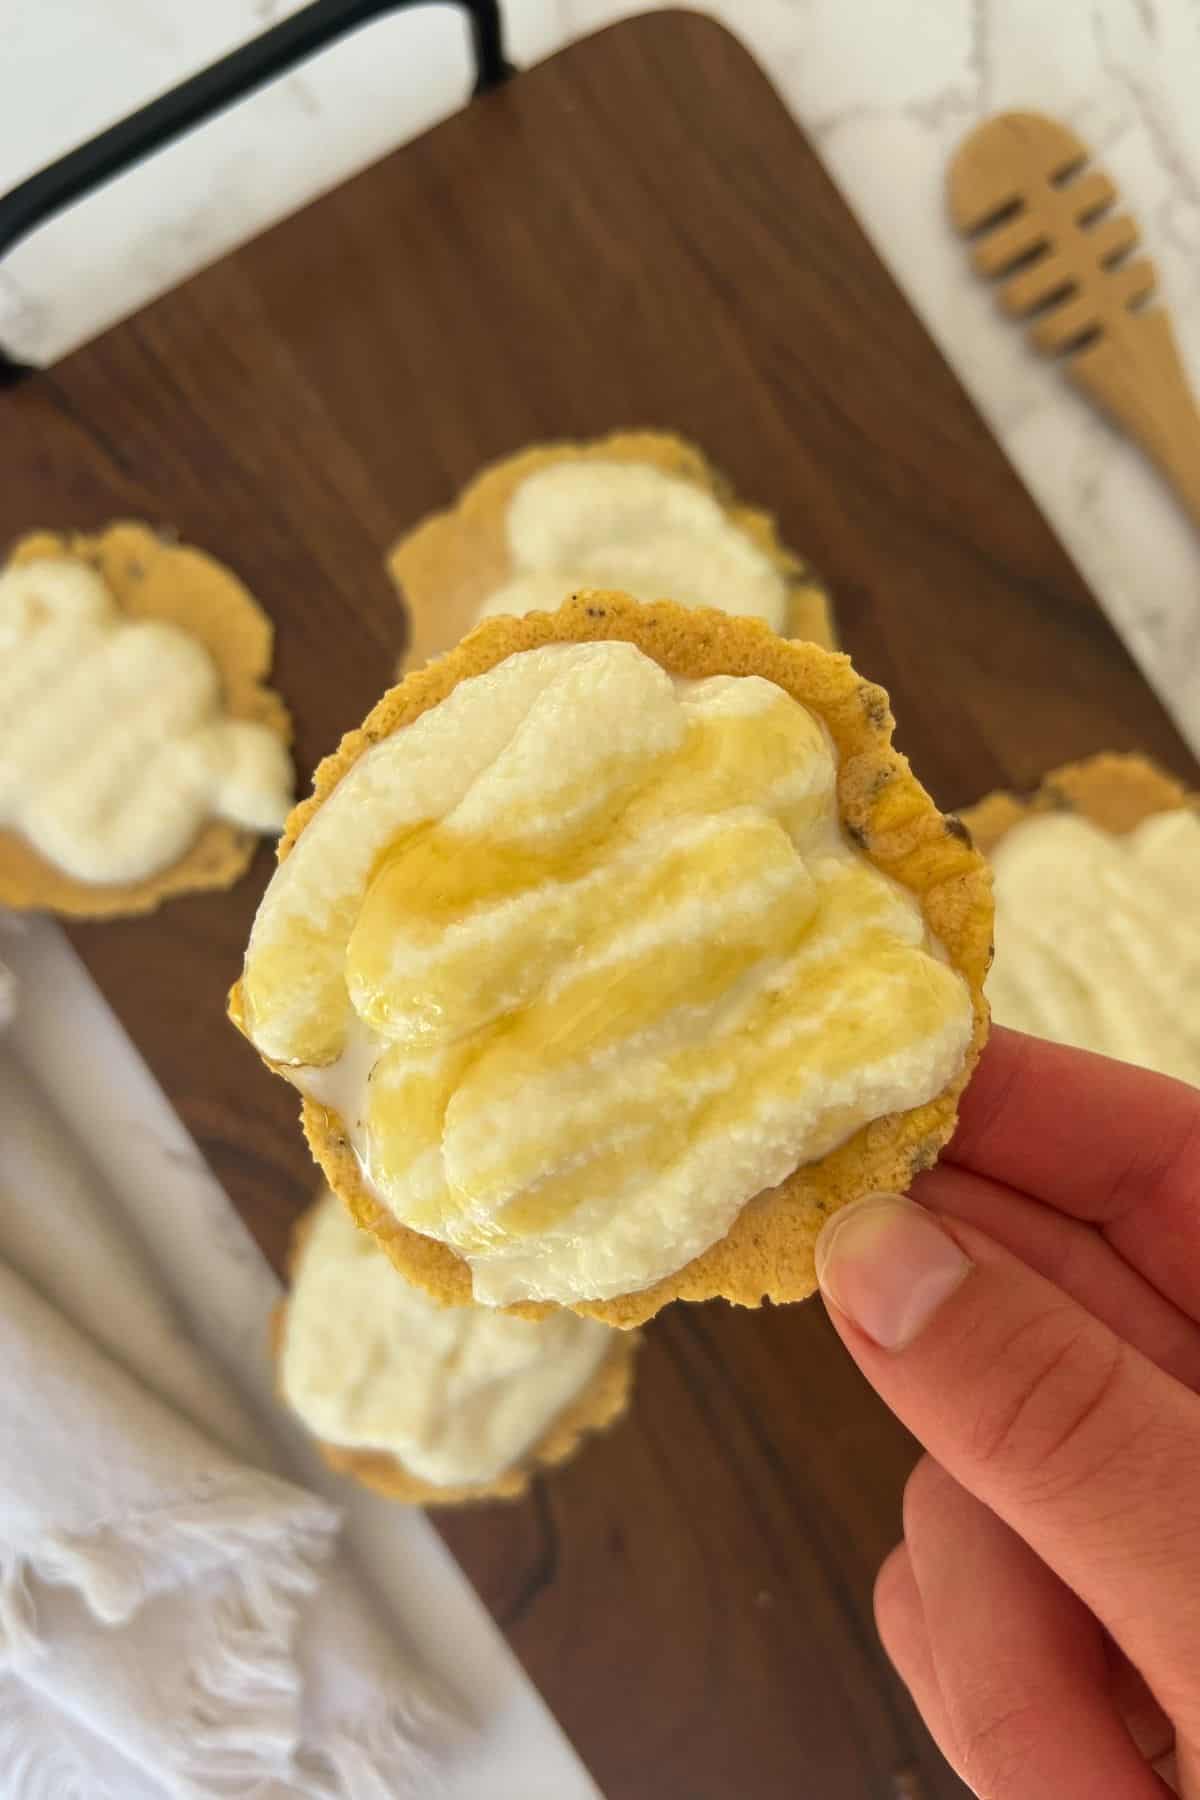 holding a cracker with the spread on top and an extra honey drizzle